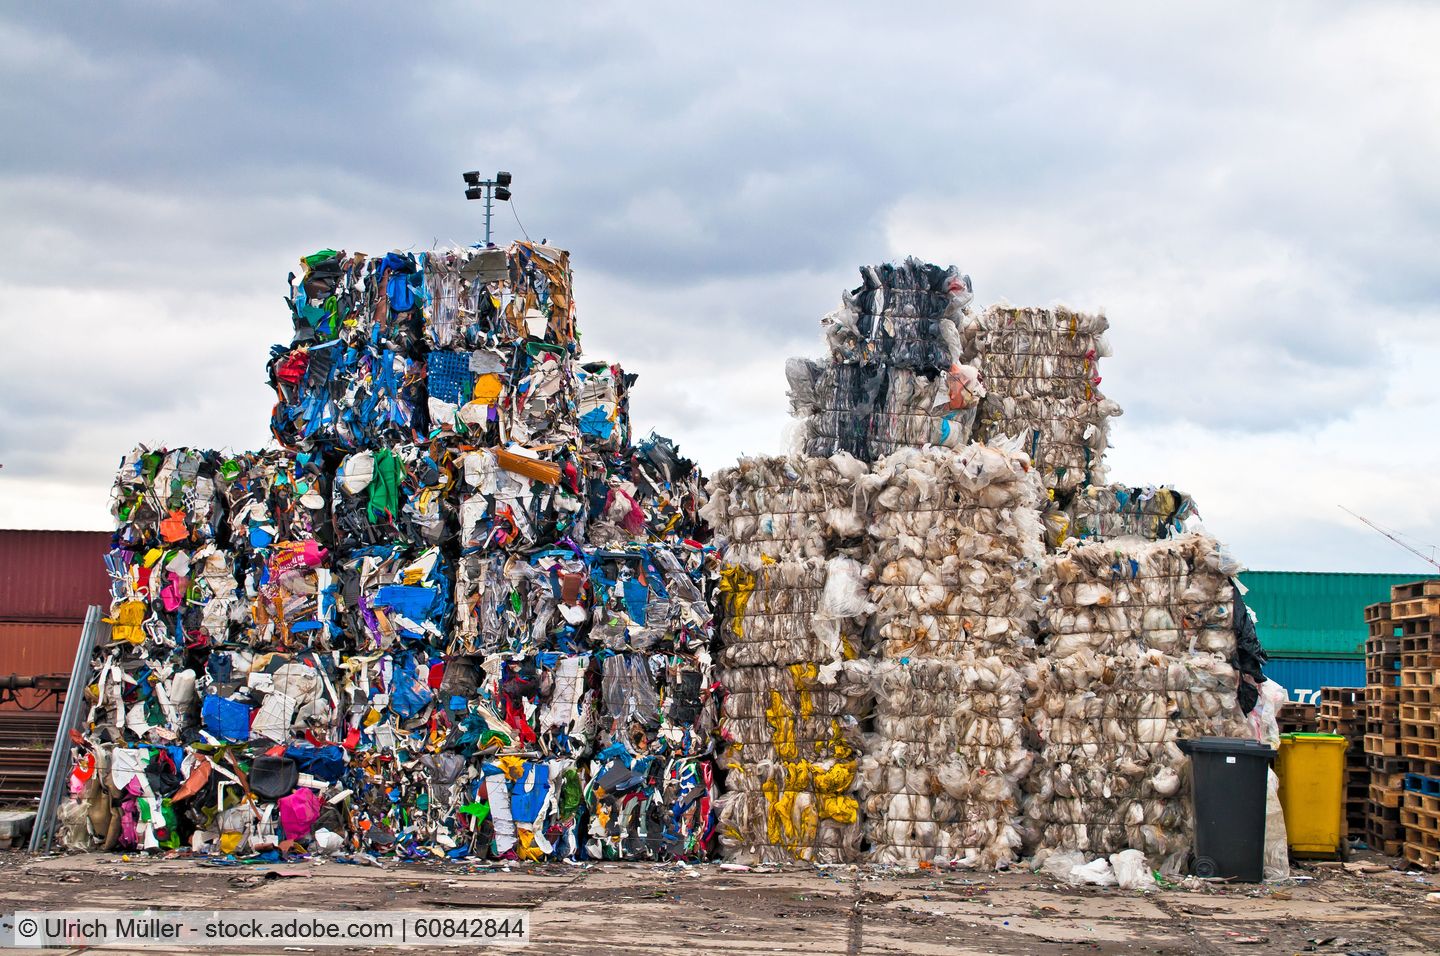 Stacked bales of plastic waste